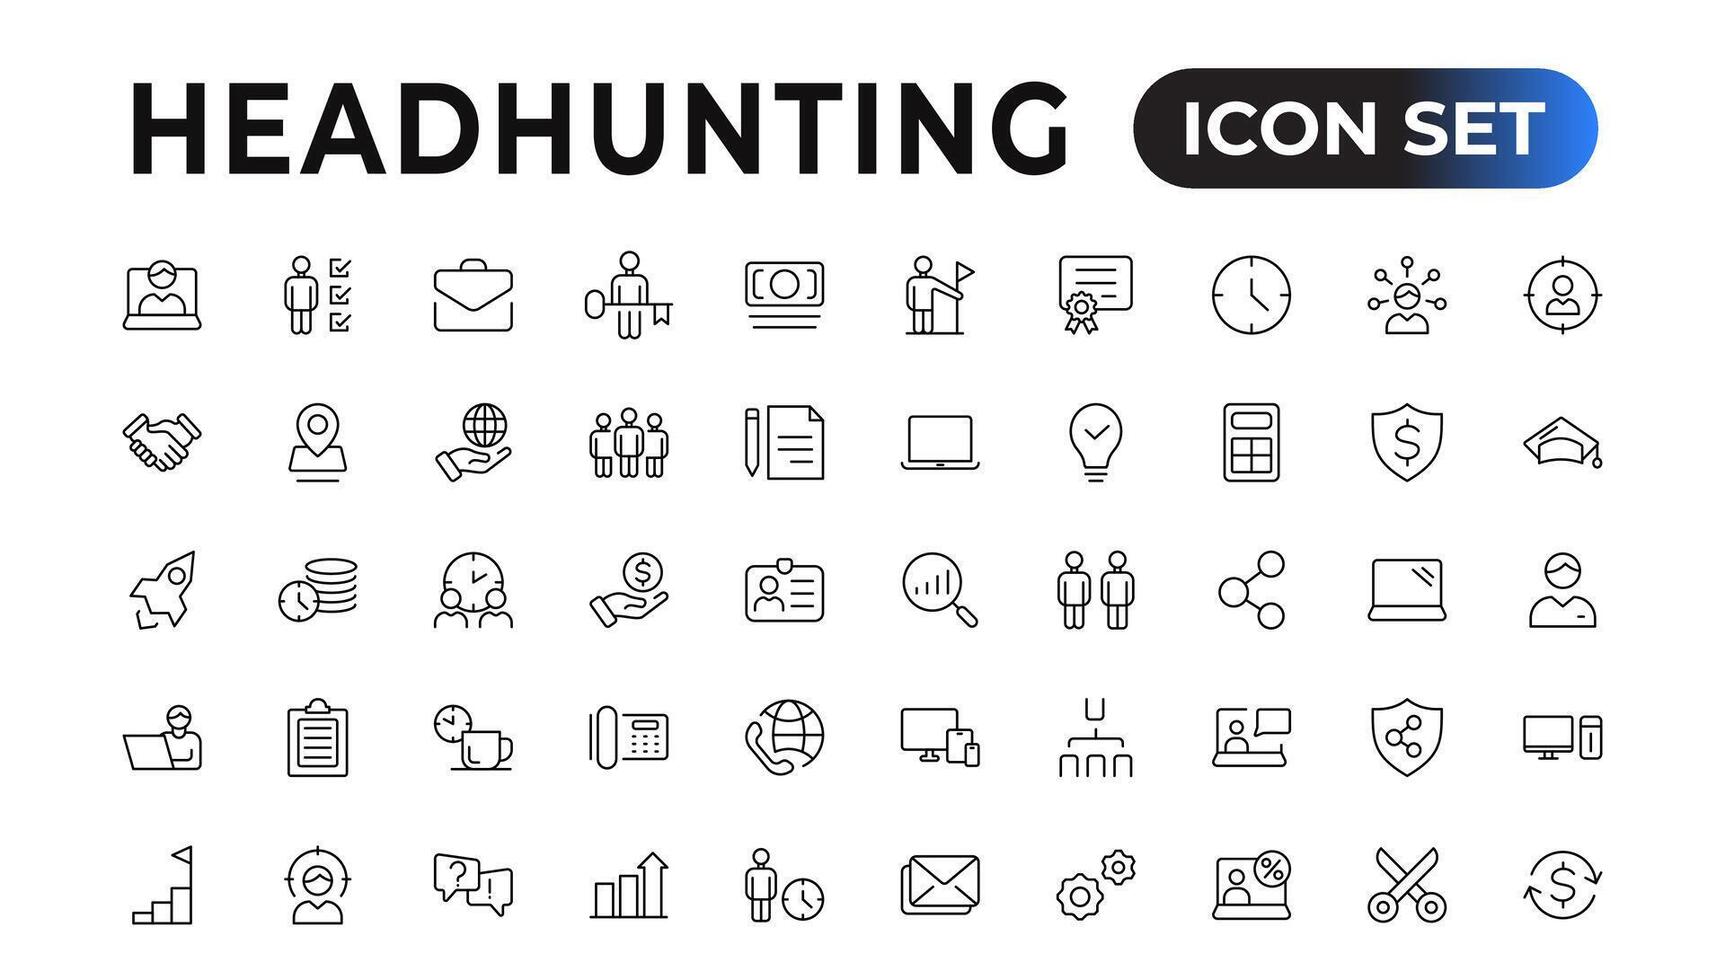 Headhunting icon set. Recruitment icon set Included the icons as Job Interview, Career Path, Resume, Job hiring, Candidate and Human resource icons. Vector illustration.